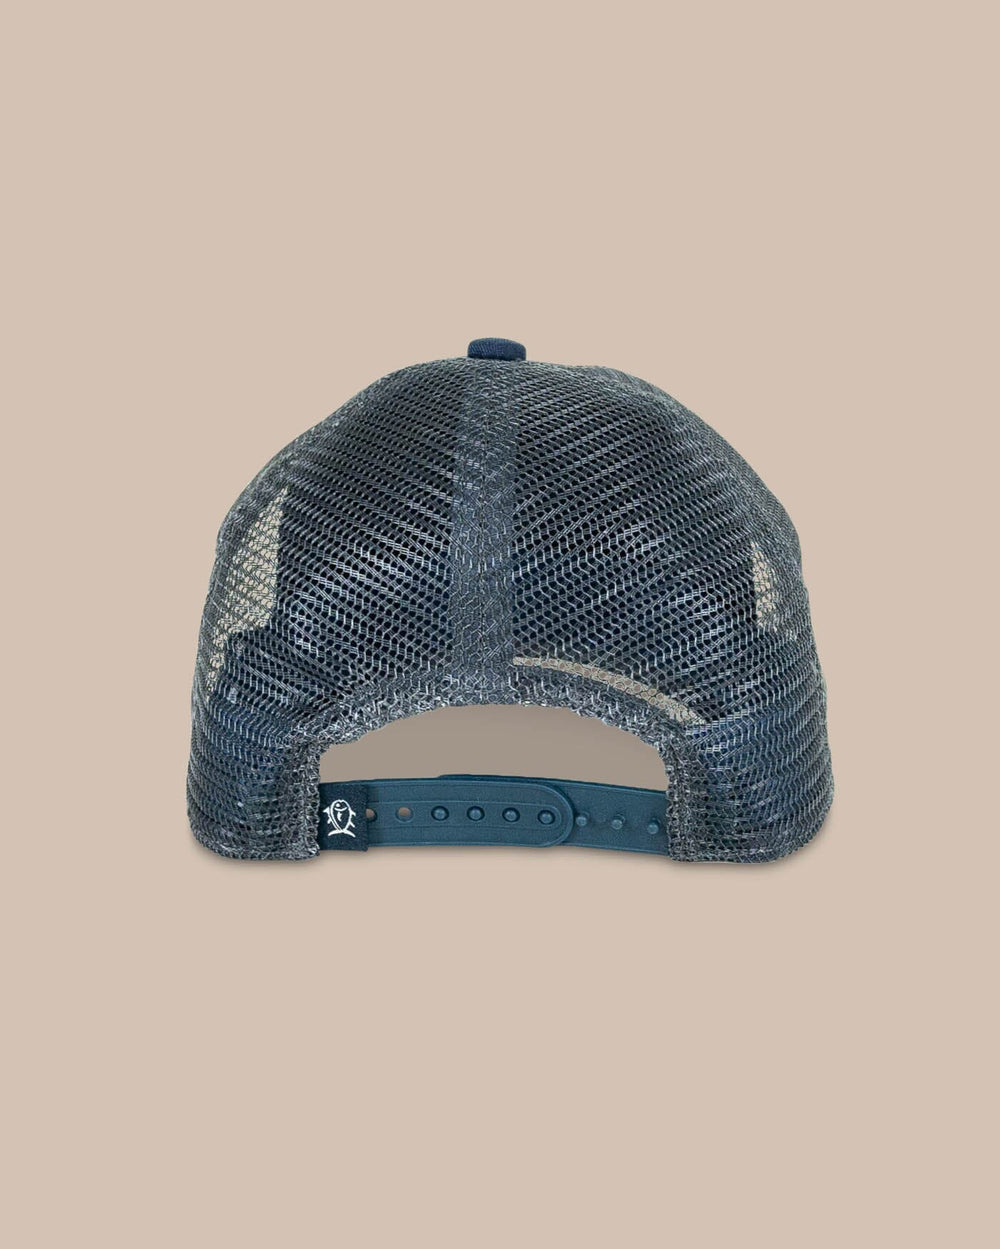 The back view of the Southern Tide Youth Gradient Skipjack Trucker Hat by Southern Tide - Navy